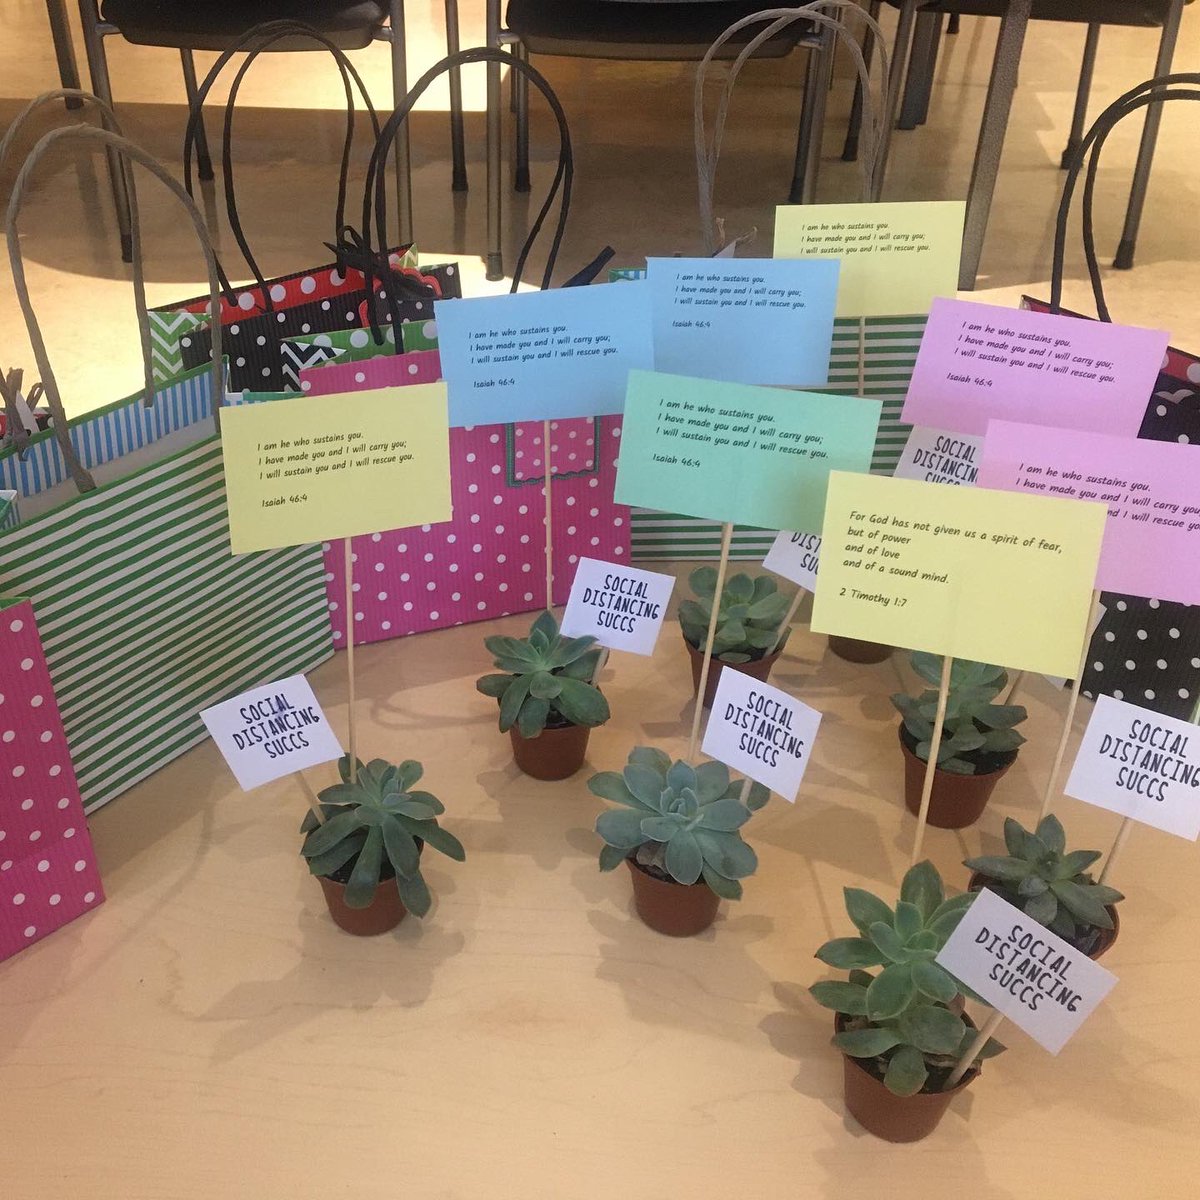 Our connections team dropped off little gifts for our staff today. 😄 @EICSfaith_well @EICSTalks 
#socialdistancingsuccs #staffwellness #giftofgiving #nottodaycorona